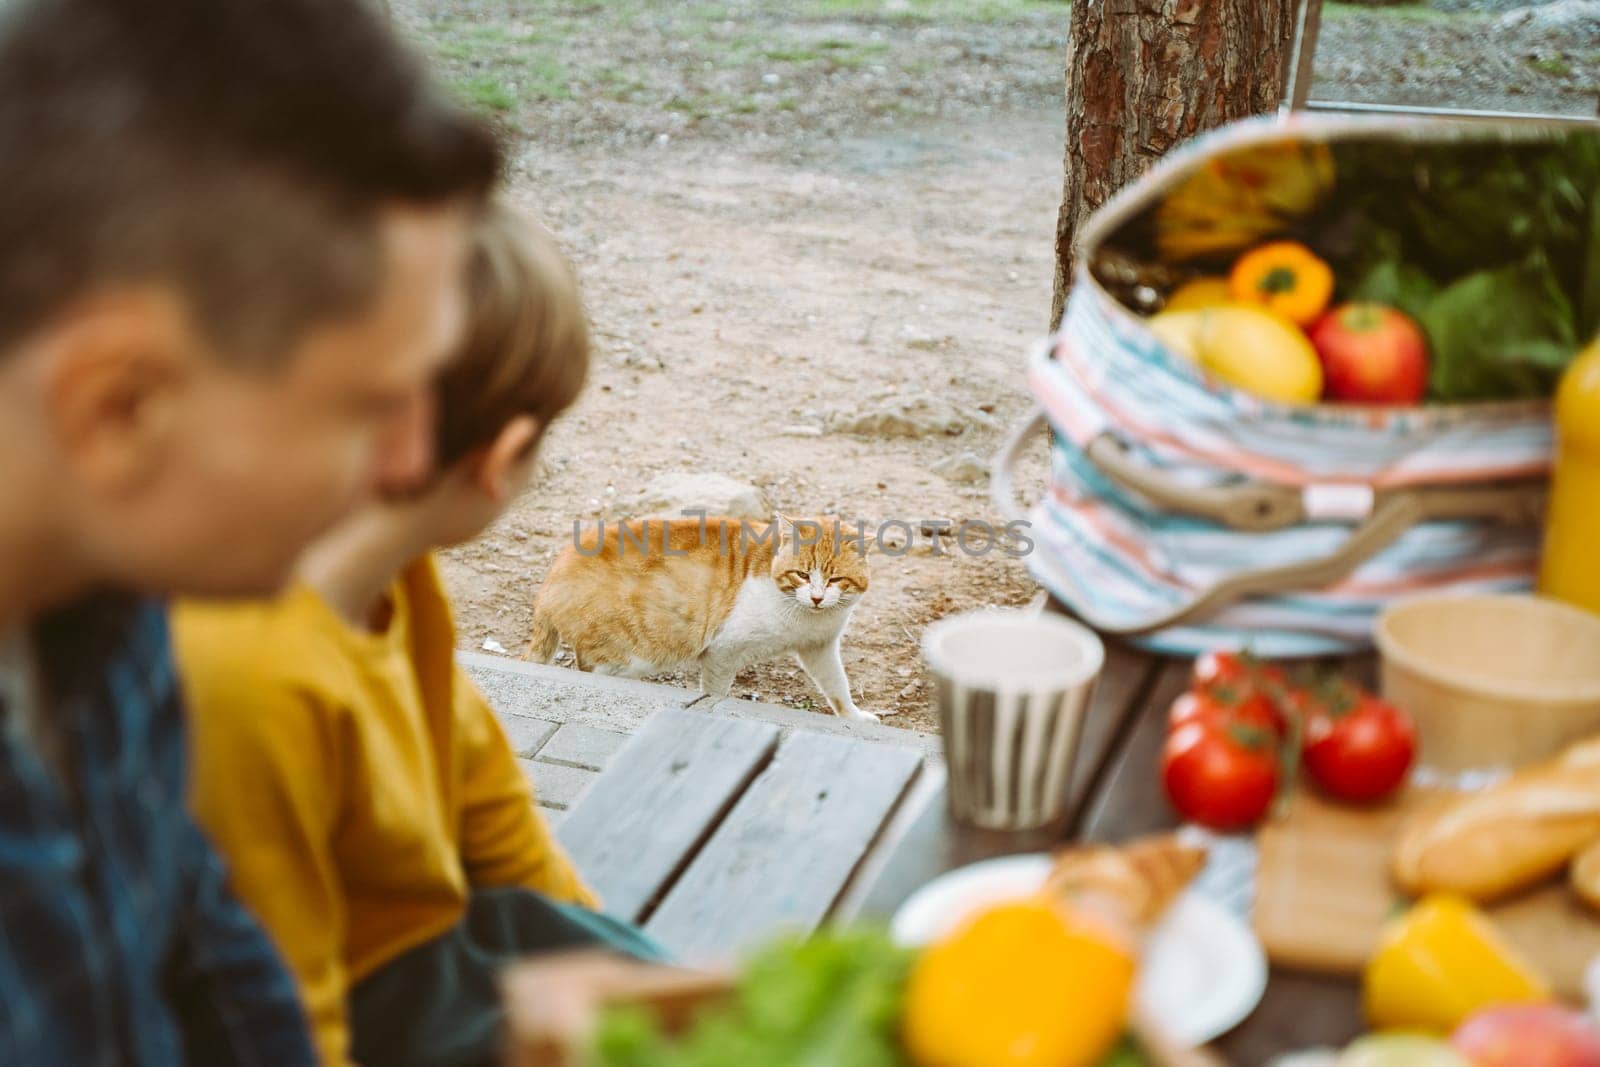 Father dad school kid boy child having a picnic with cat in the forest camping site with vegetables, juice, coffee, and croissants. Fresh organic veggies surrounded with bread baguettes